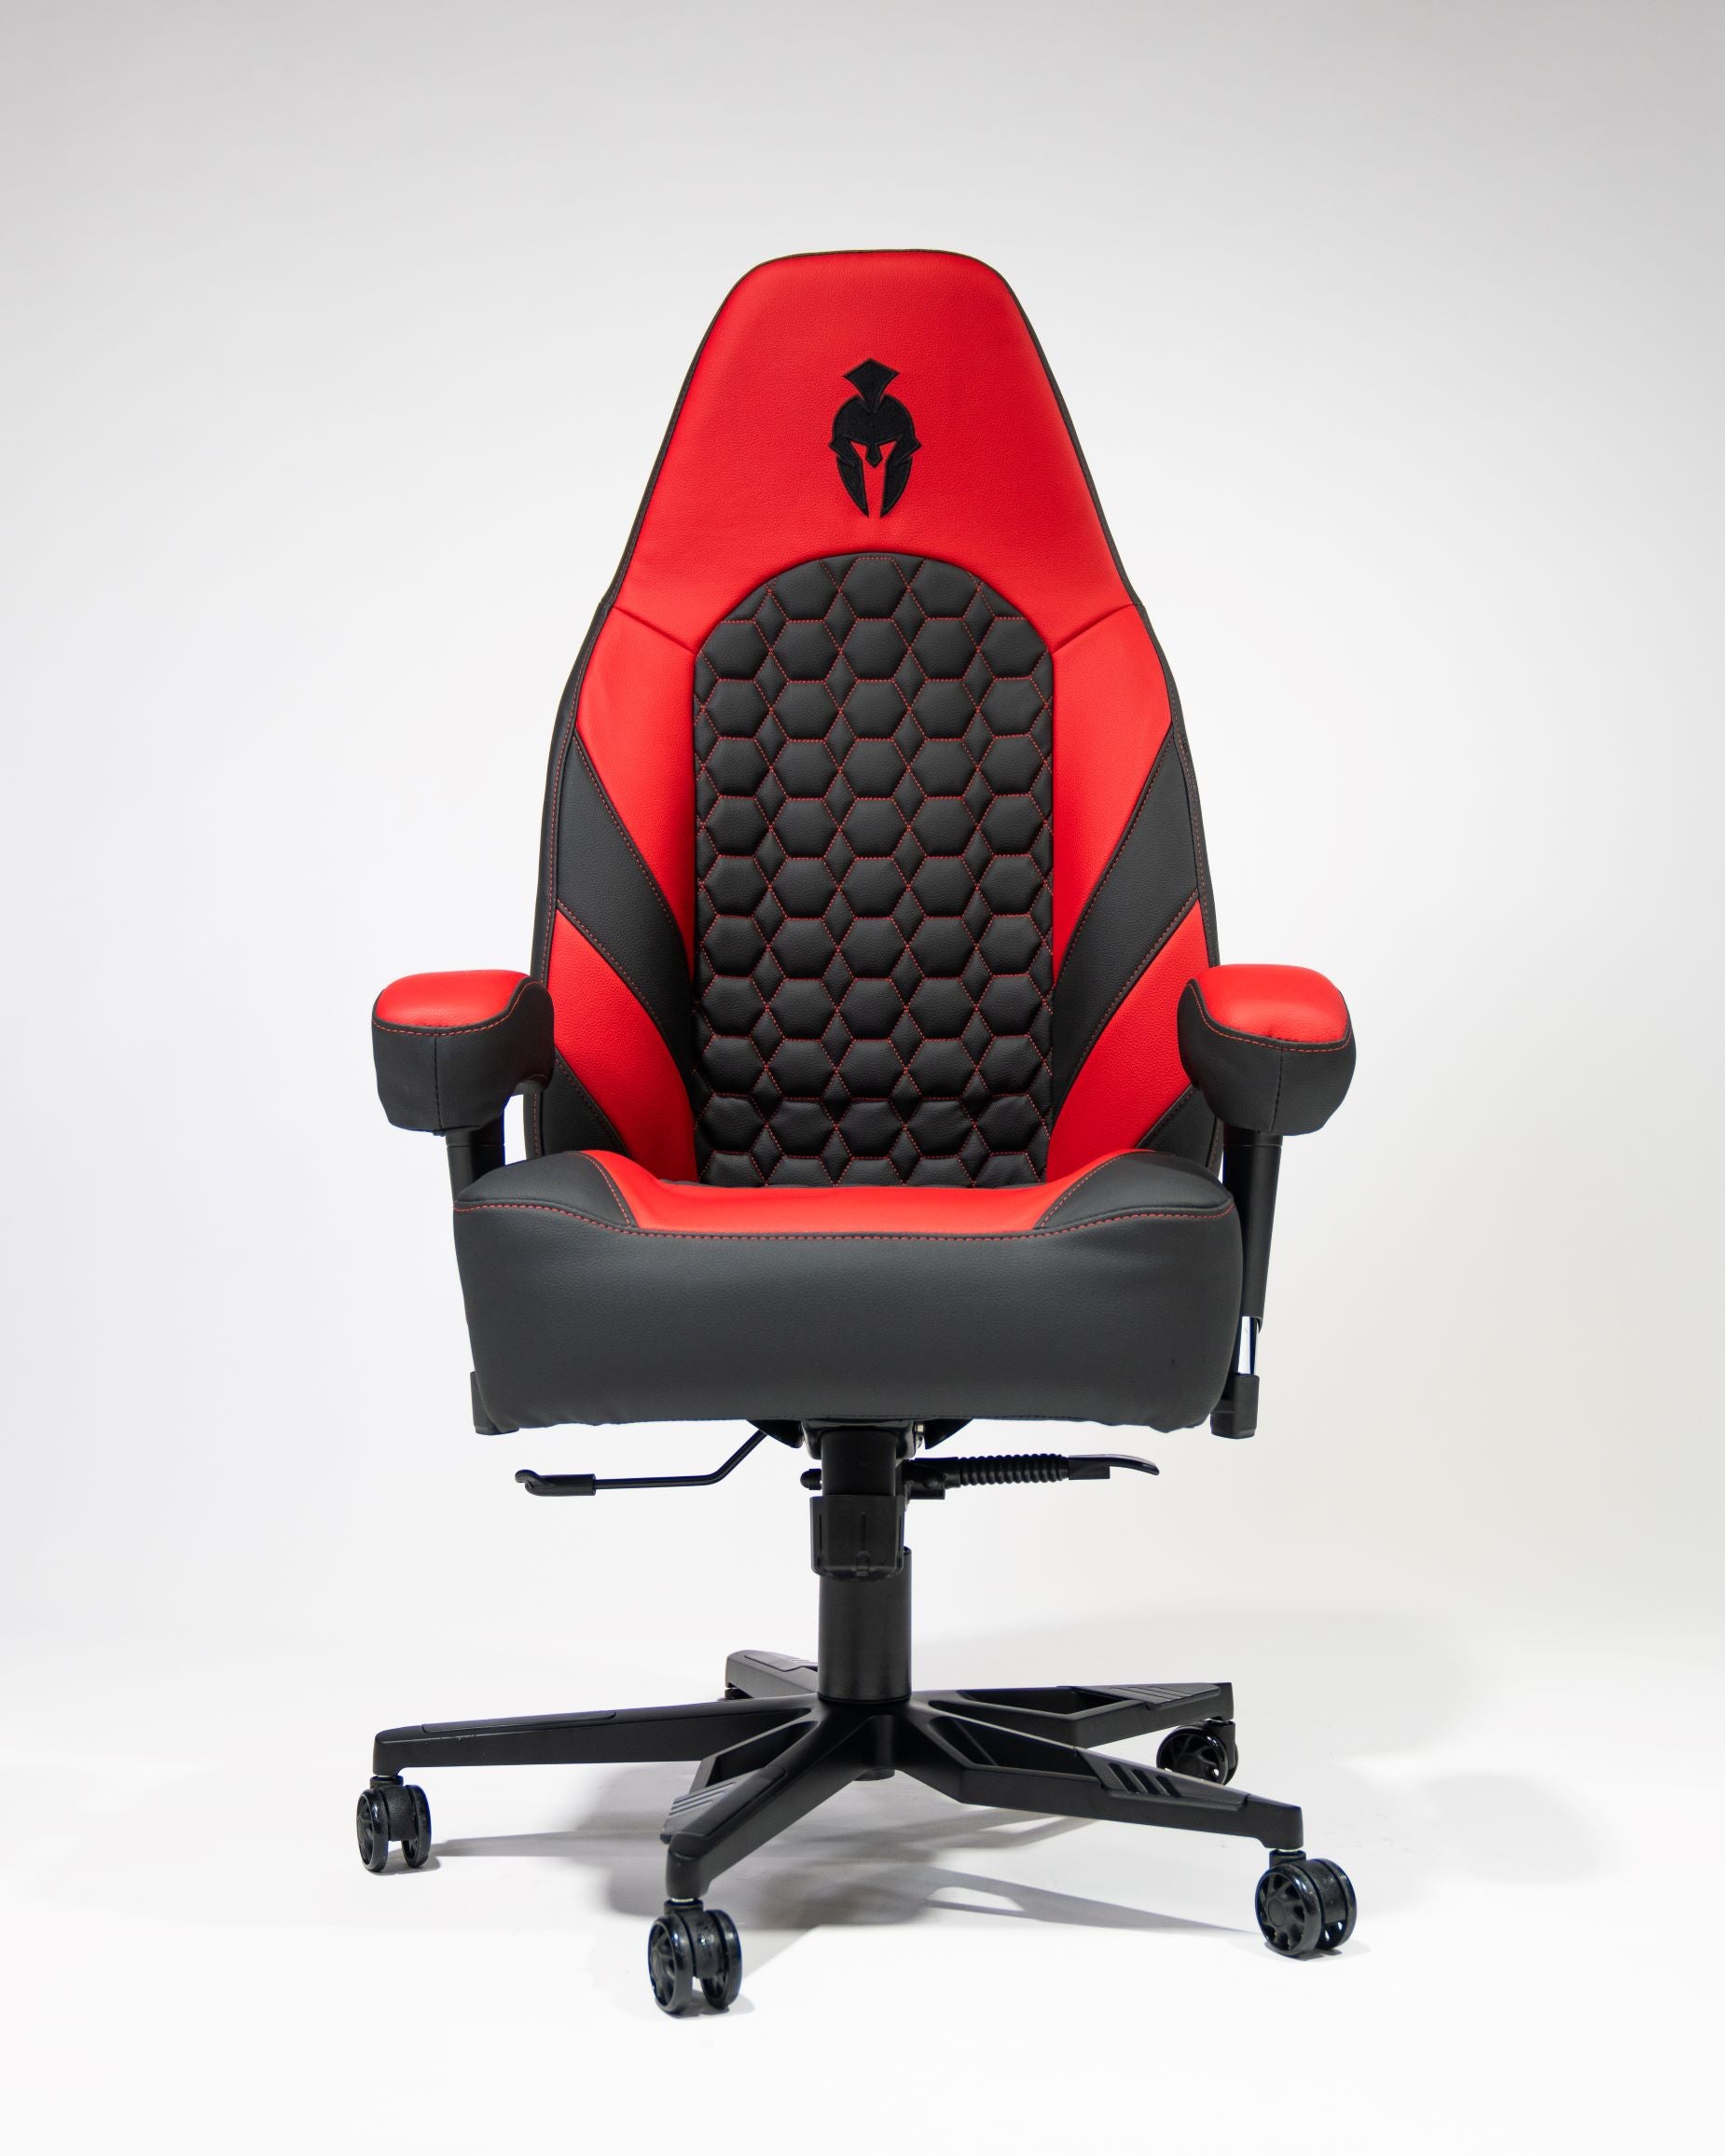 Kratos Pro 4D Throne V2 Red and Black Haptic Gaming chair from the front view on a white background